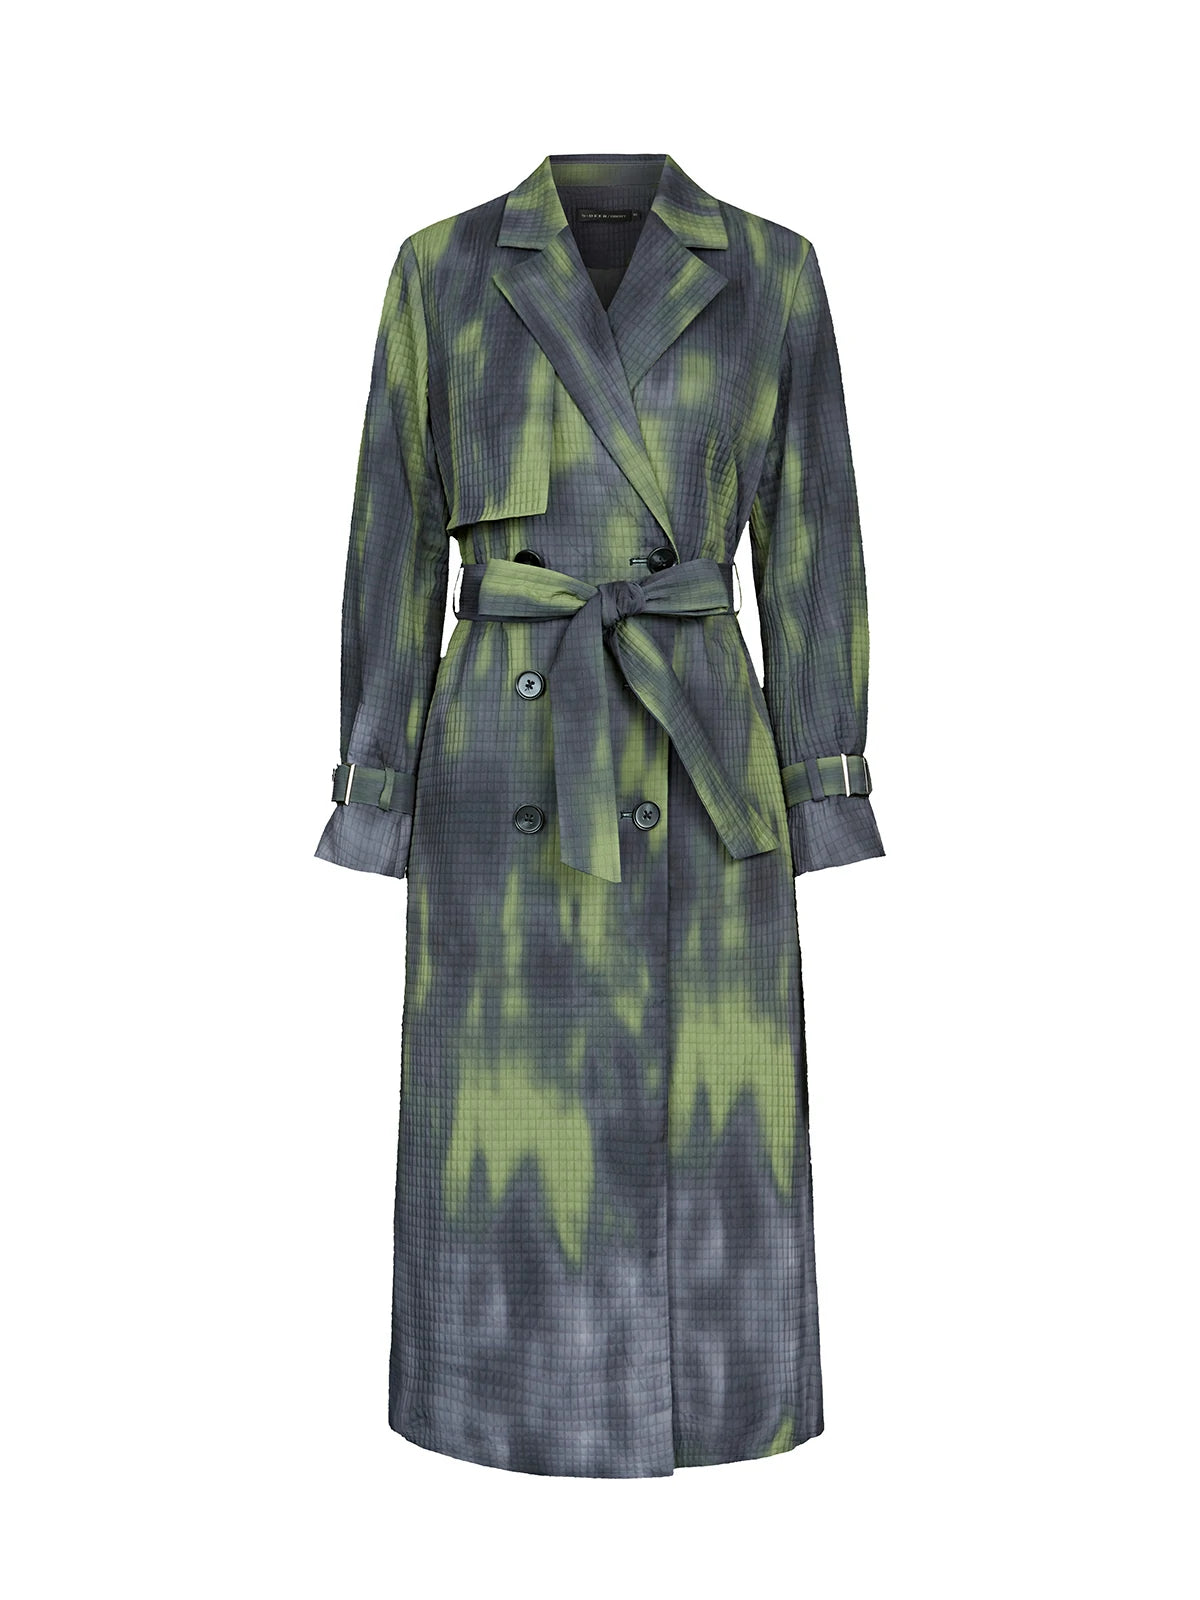 Flaunt your individuality with this gray and green trench coat, boasting irregular prints that create an artistic and stylish flair.